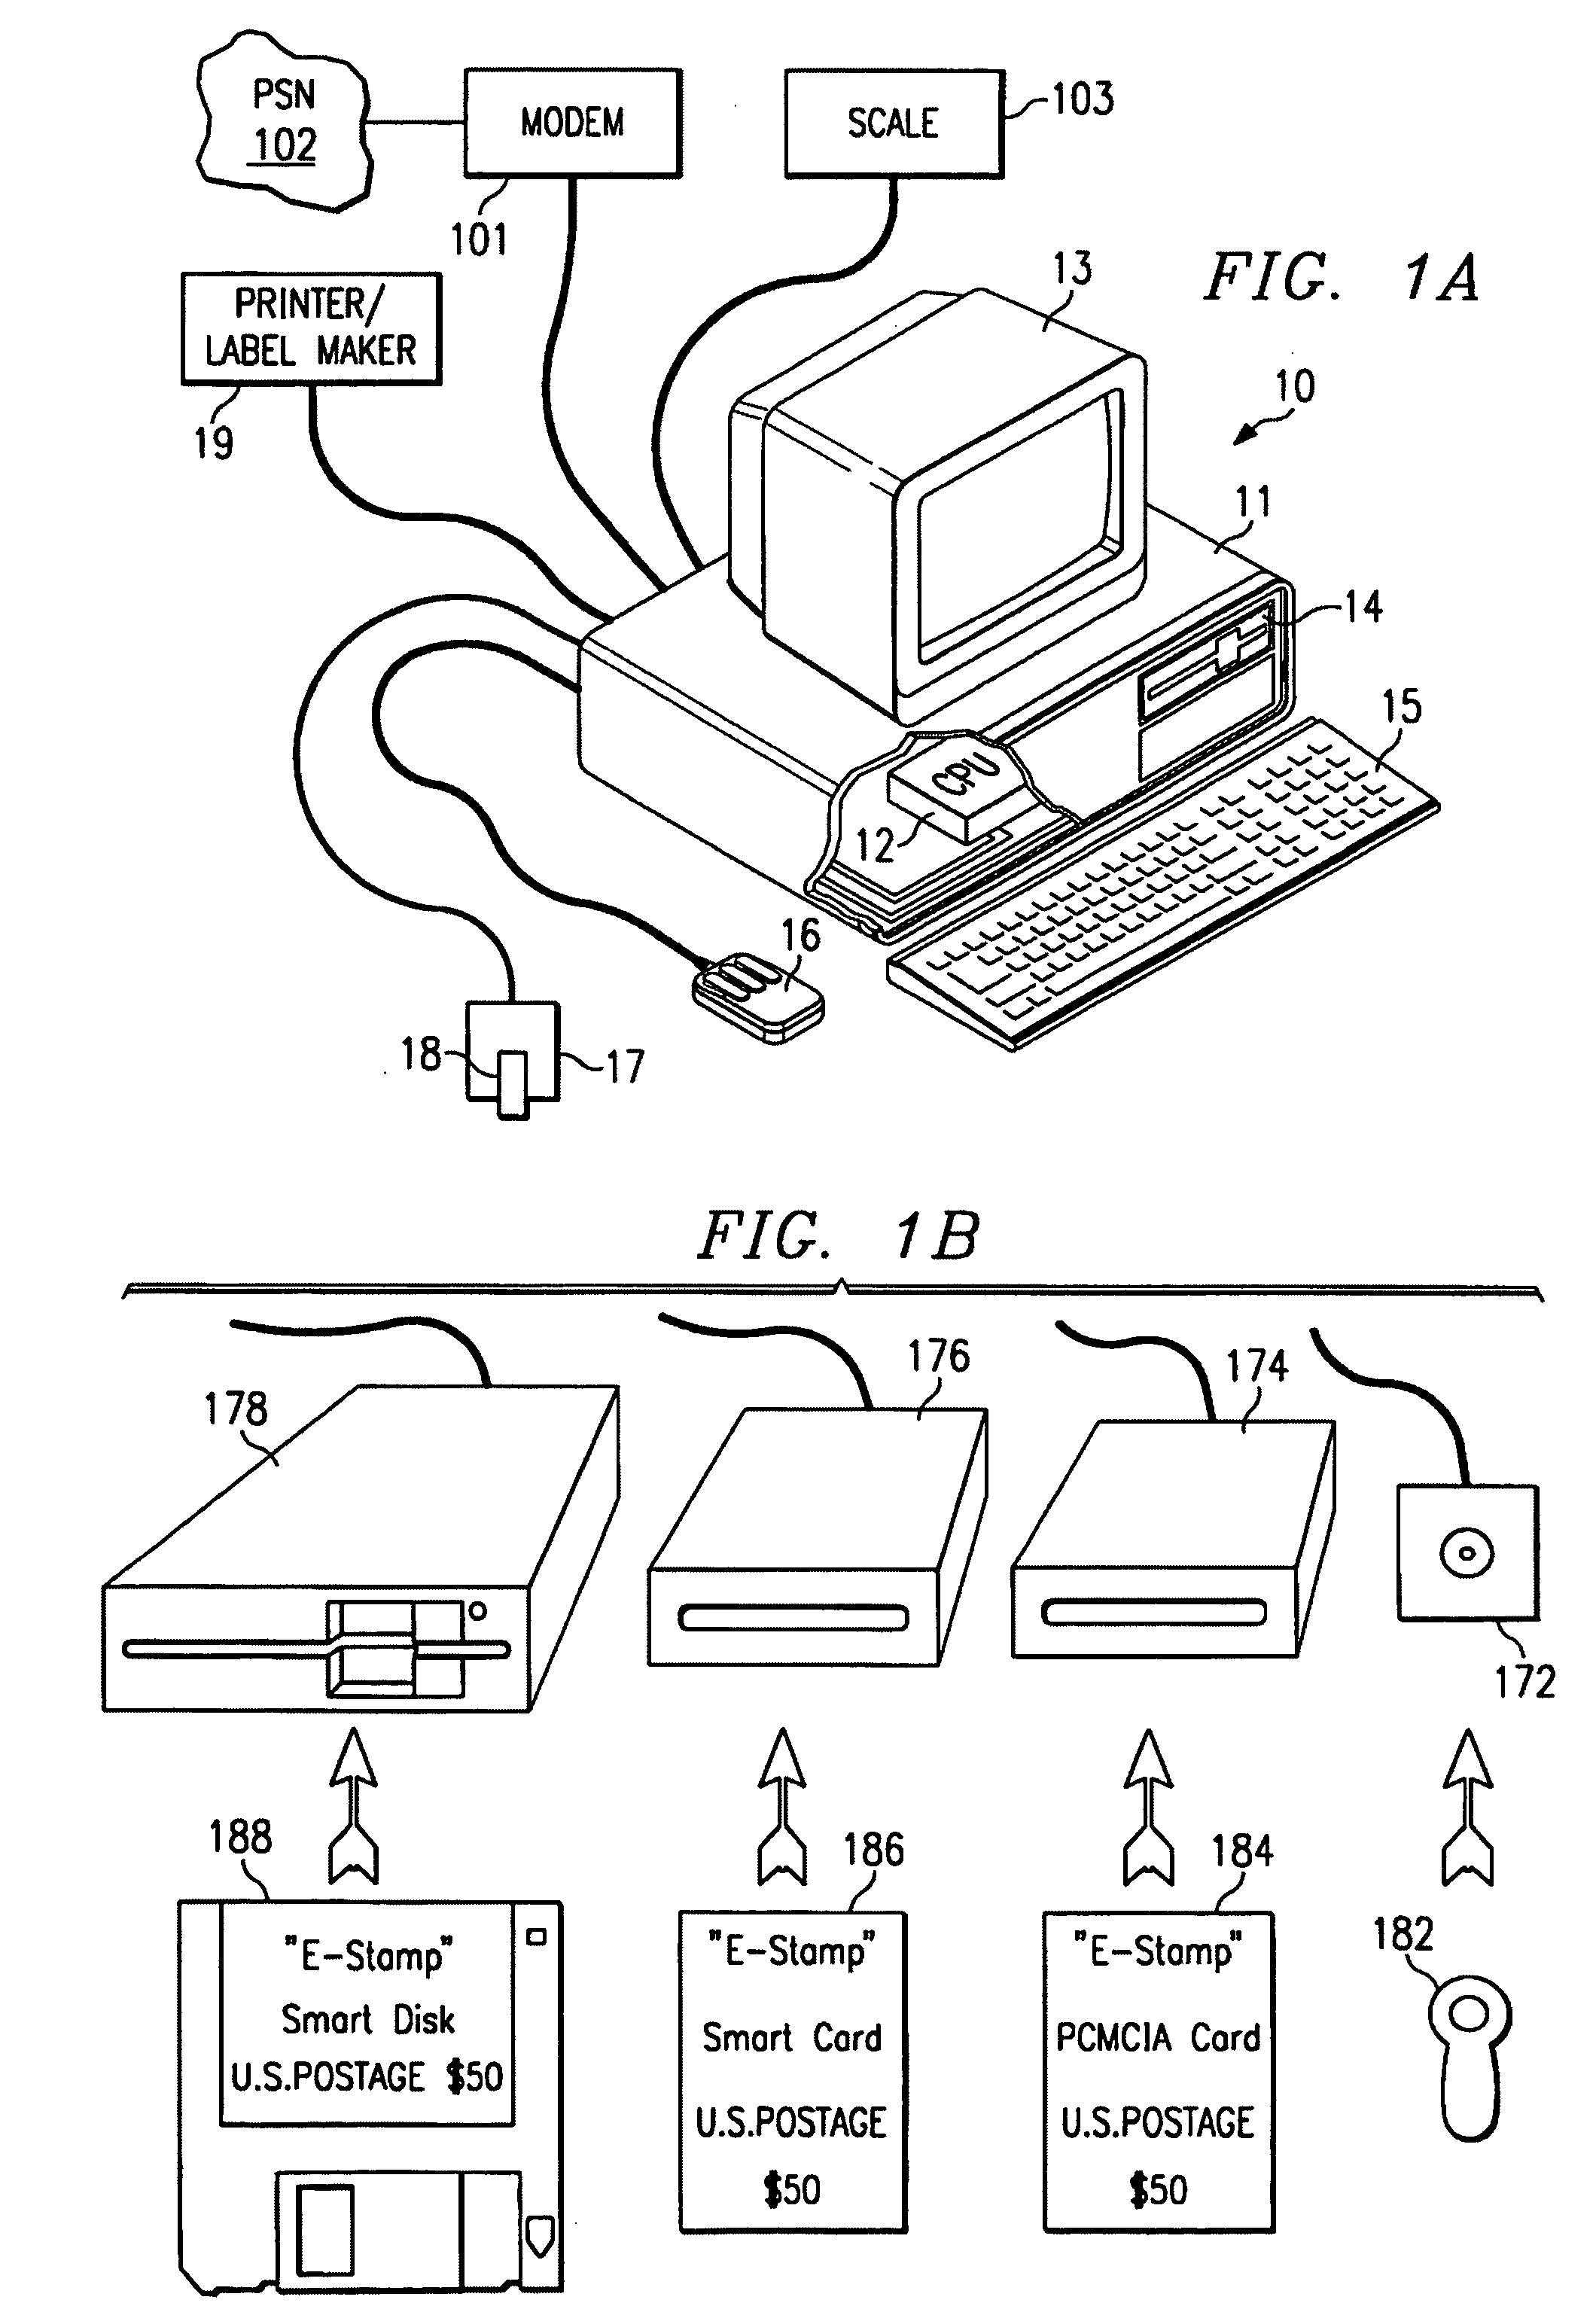 System and method for generating personalized postage indicia